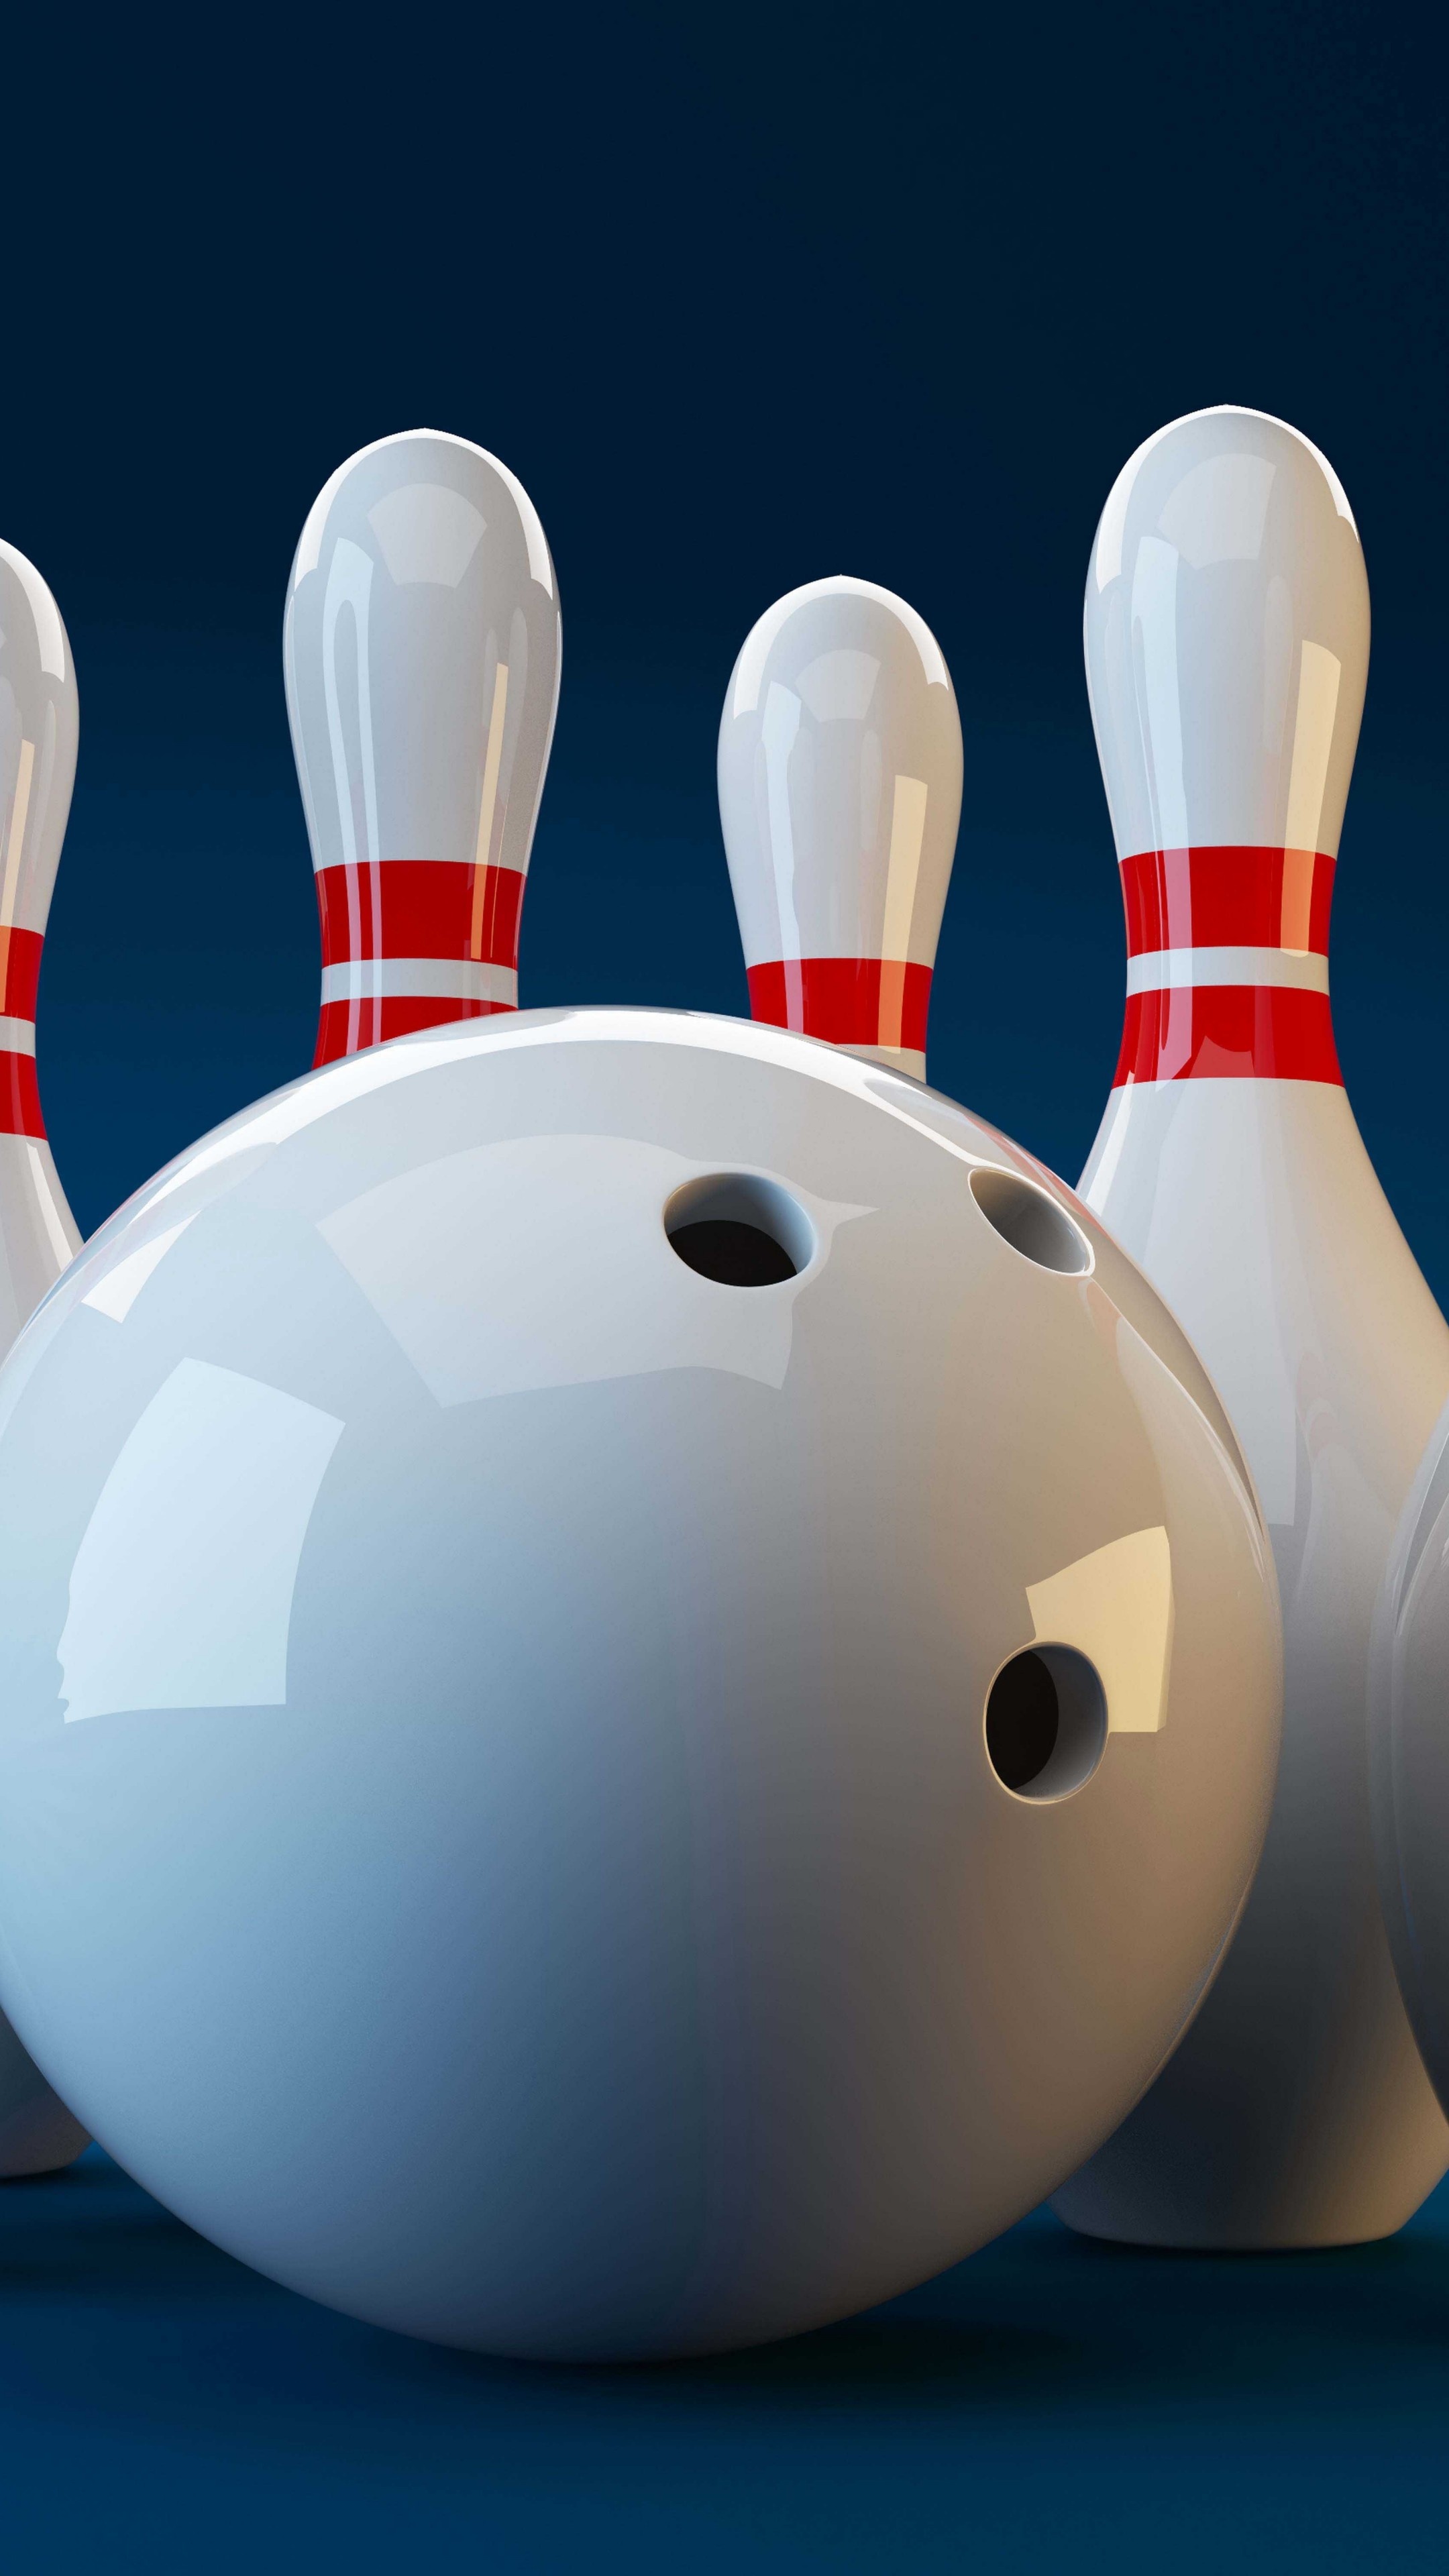 Bowling: A game which goal is to knock down the pins set at the end of the board-less track, Ball. 2160x3840 4K Wallpaper.